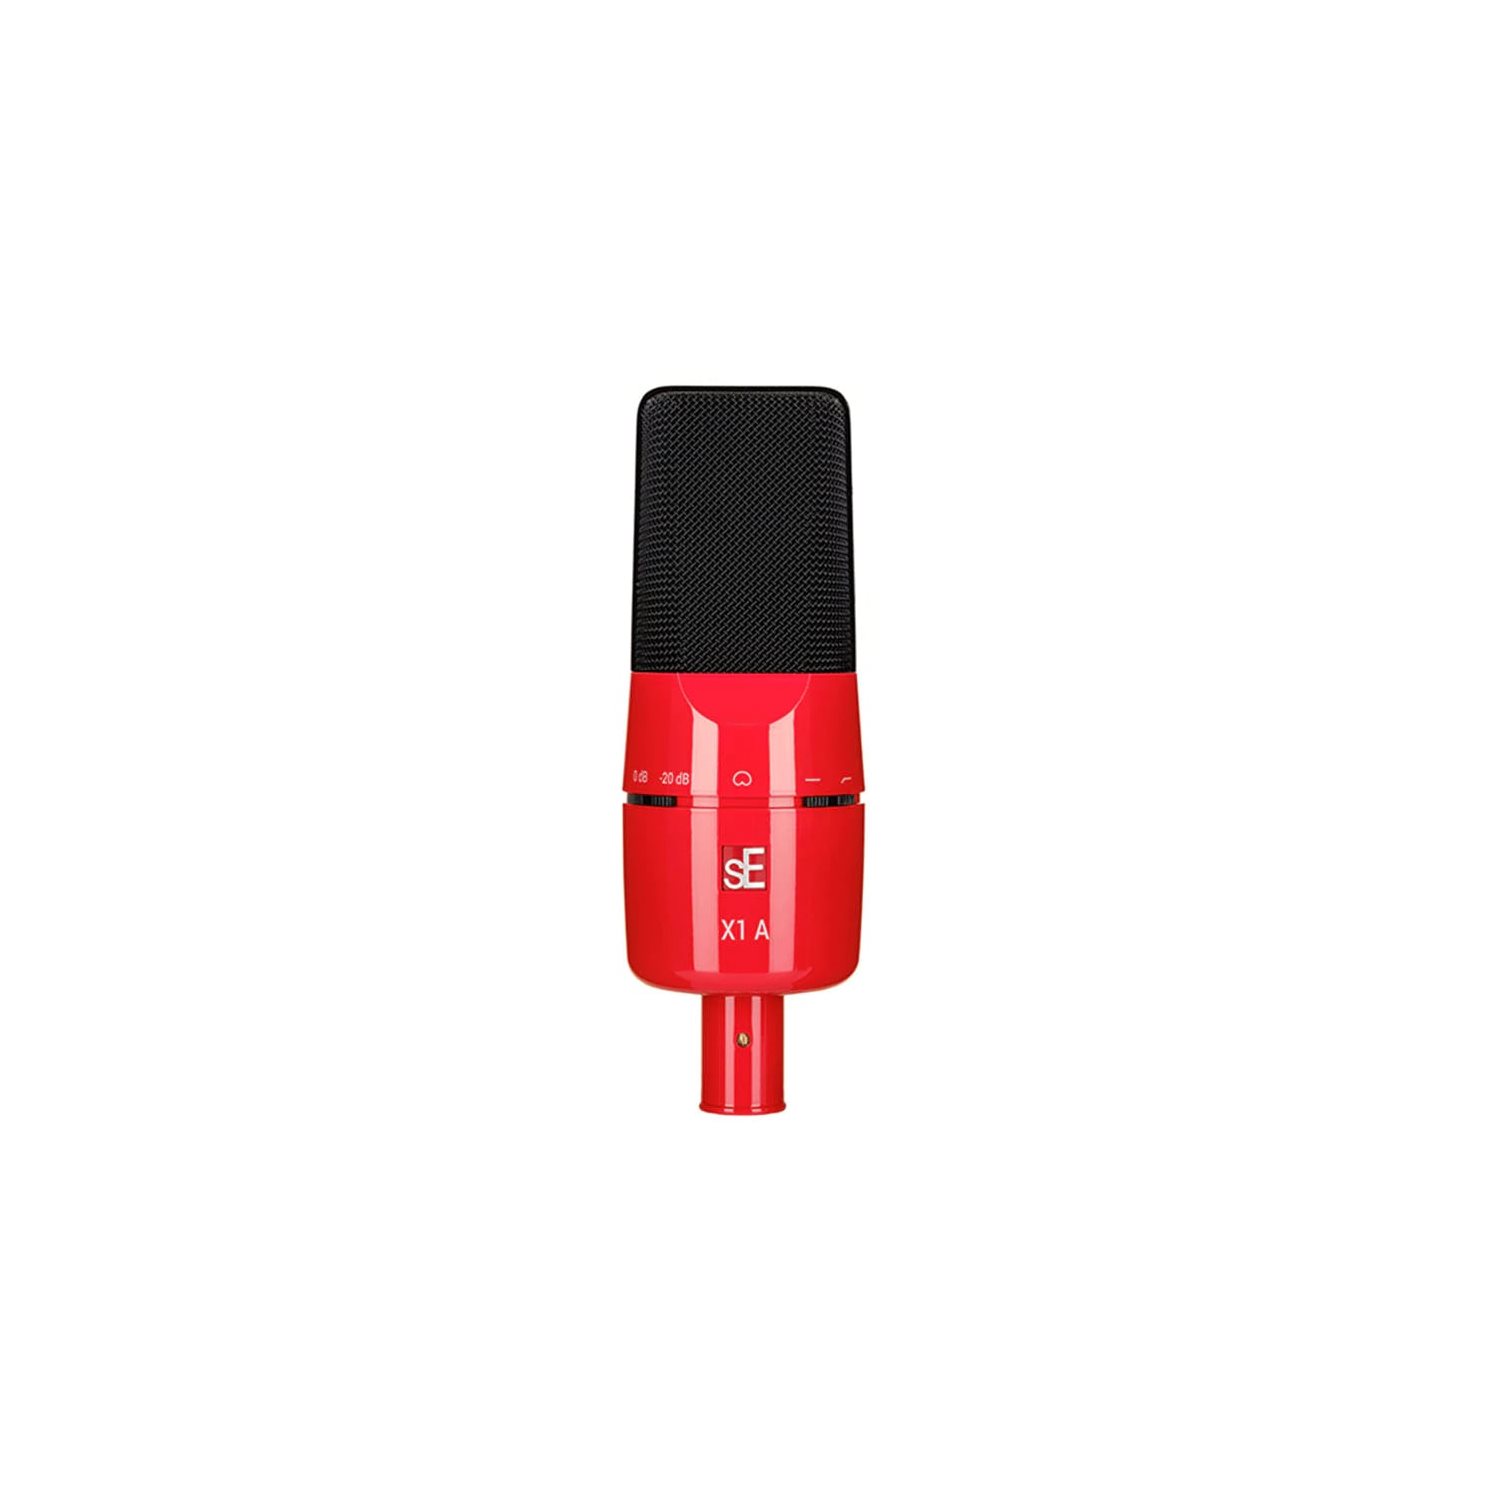 SE ELECTRONICS - se-x1arb - large diaphragm condenser microphone - x1 series - cardioid - red